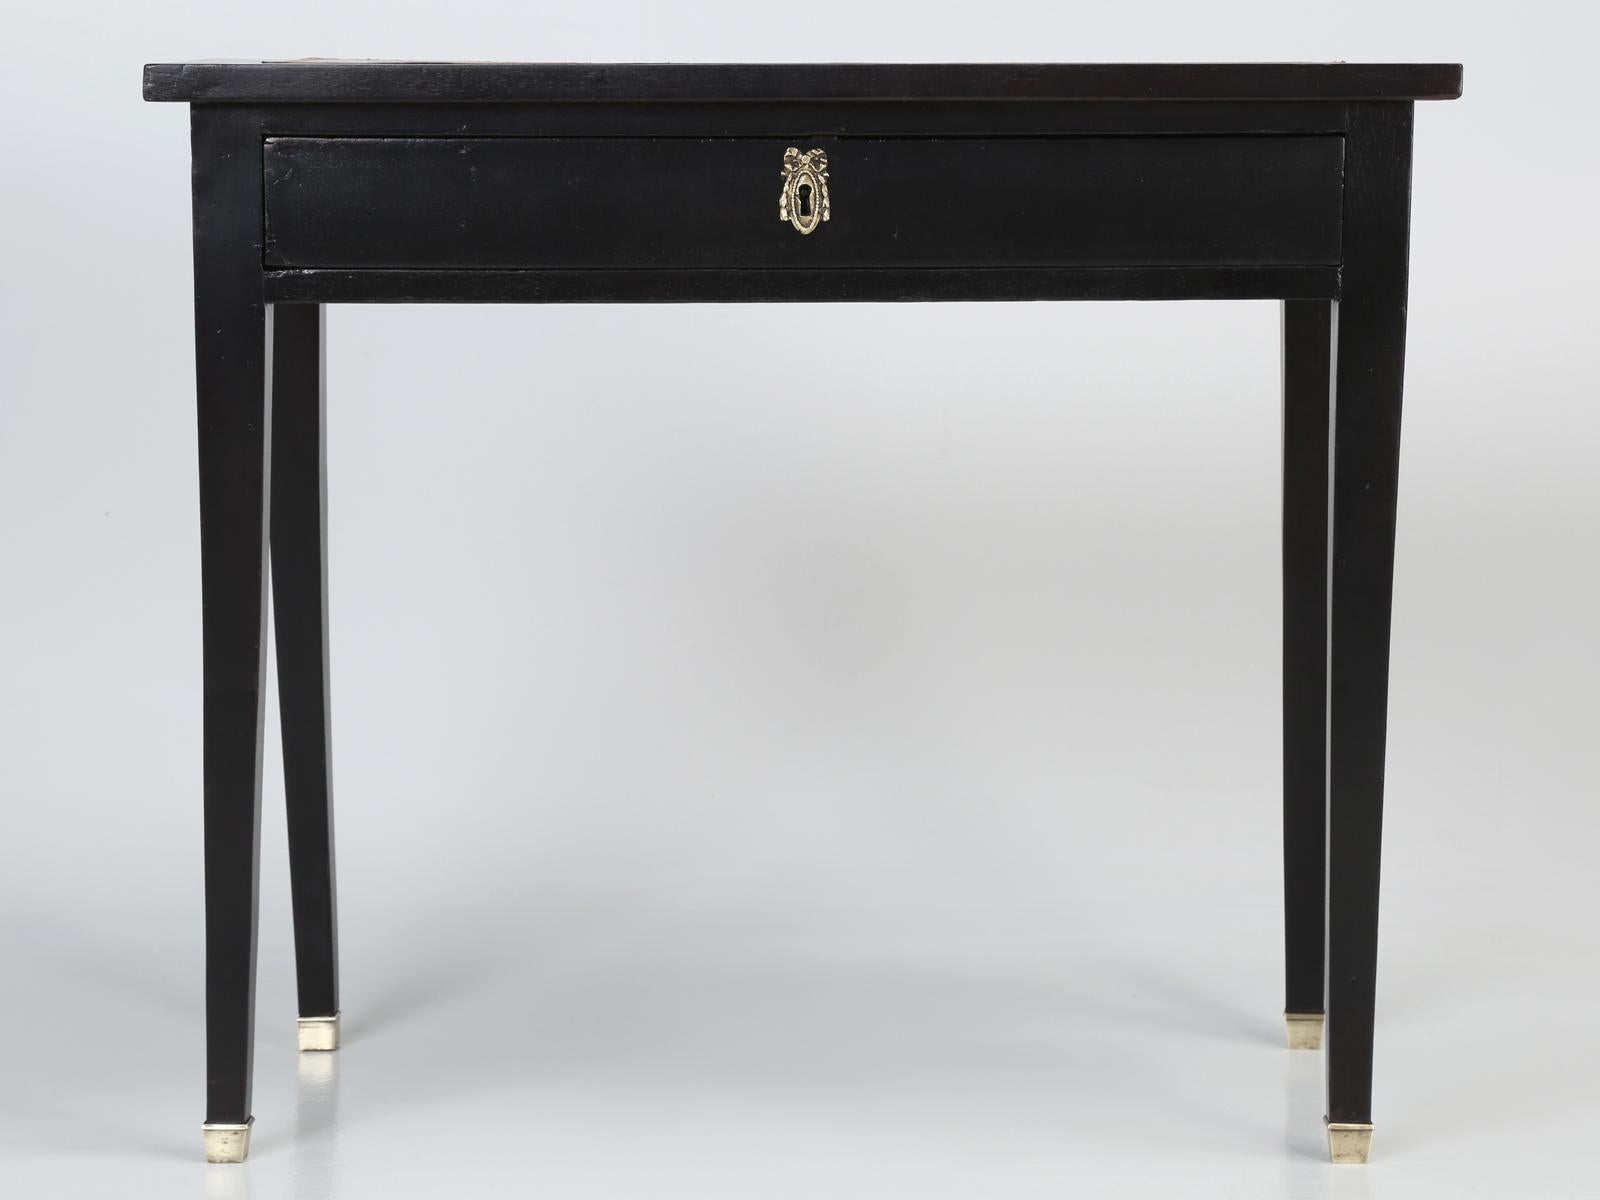 Antique French Directoire style ladies writing desk or side table. Our old plank restoration department, hand-stripped the mahogany writing desk to the bare wood, restored the desk structurally and applied an ebony finish to the exterior of the